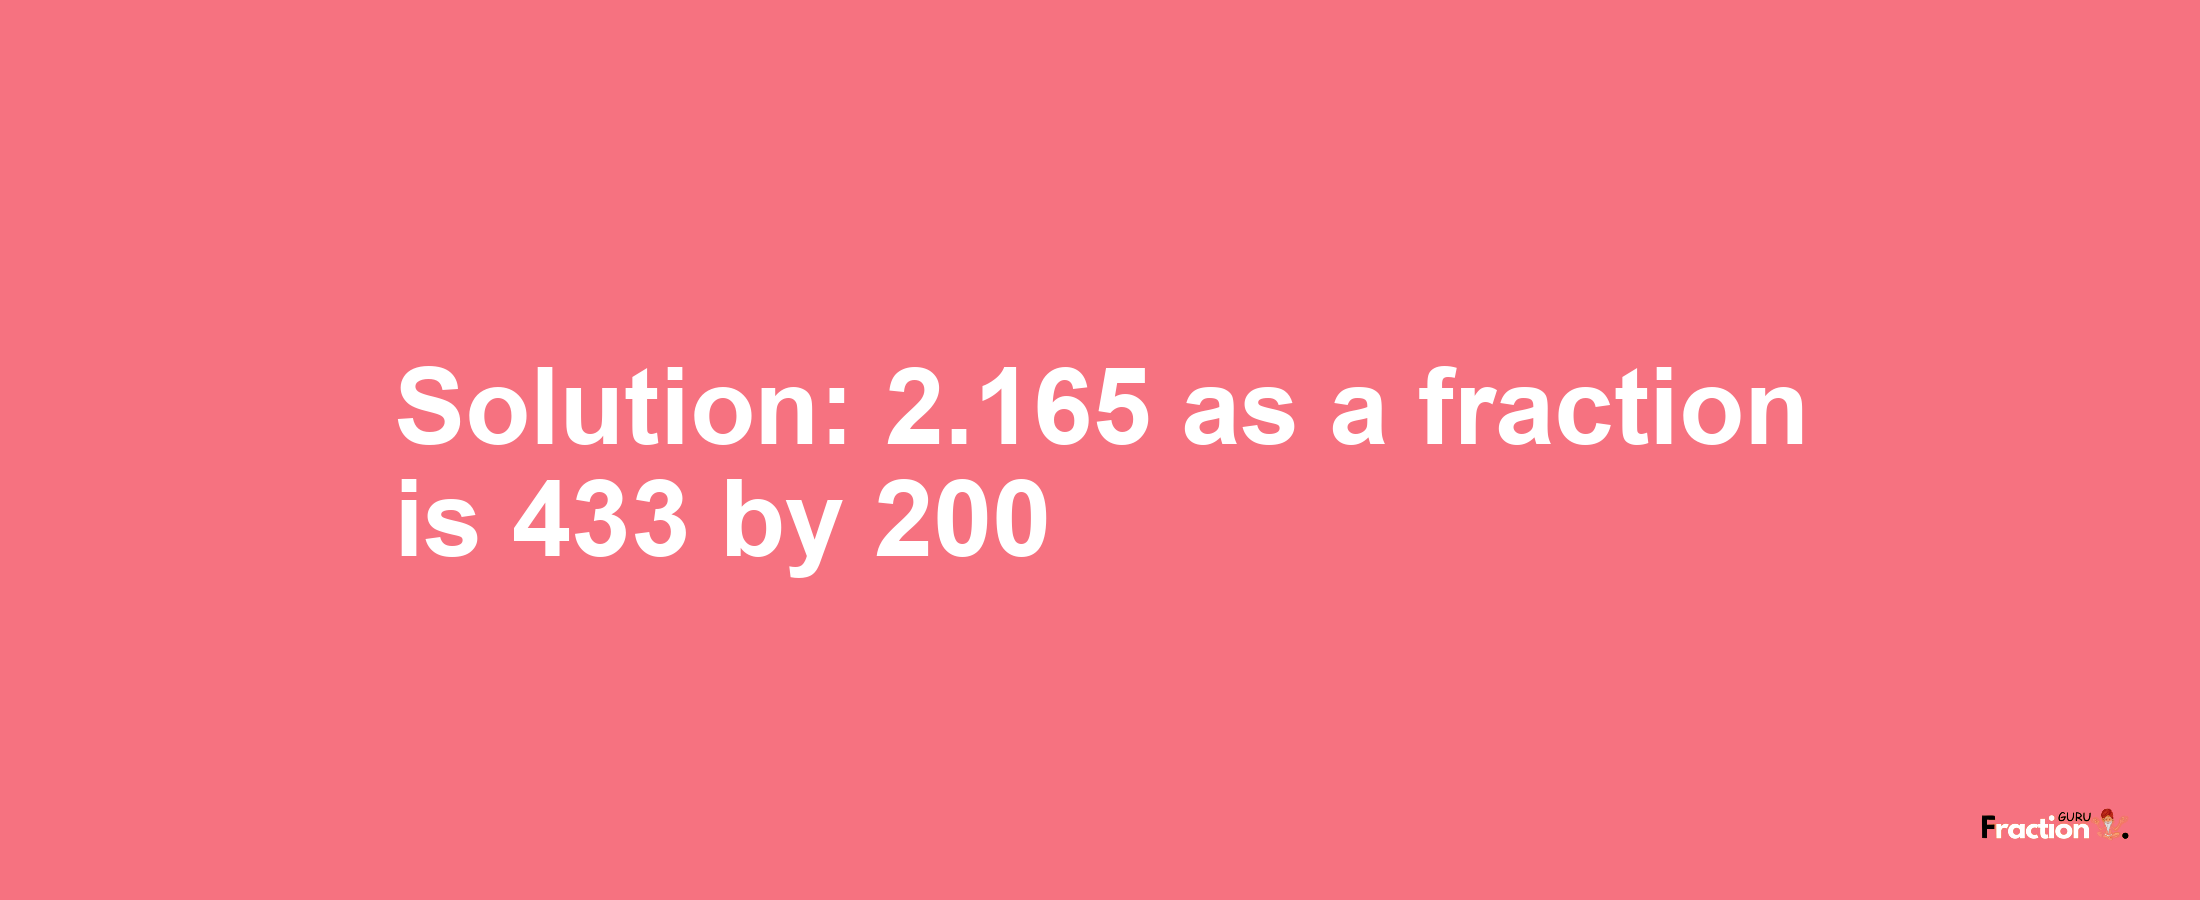 Solution:2.165 as a fraction is 433/200